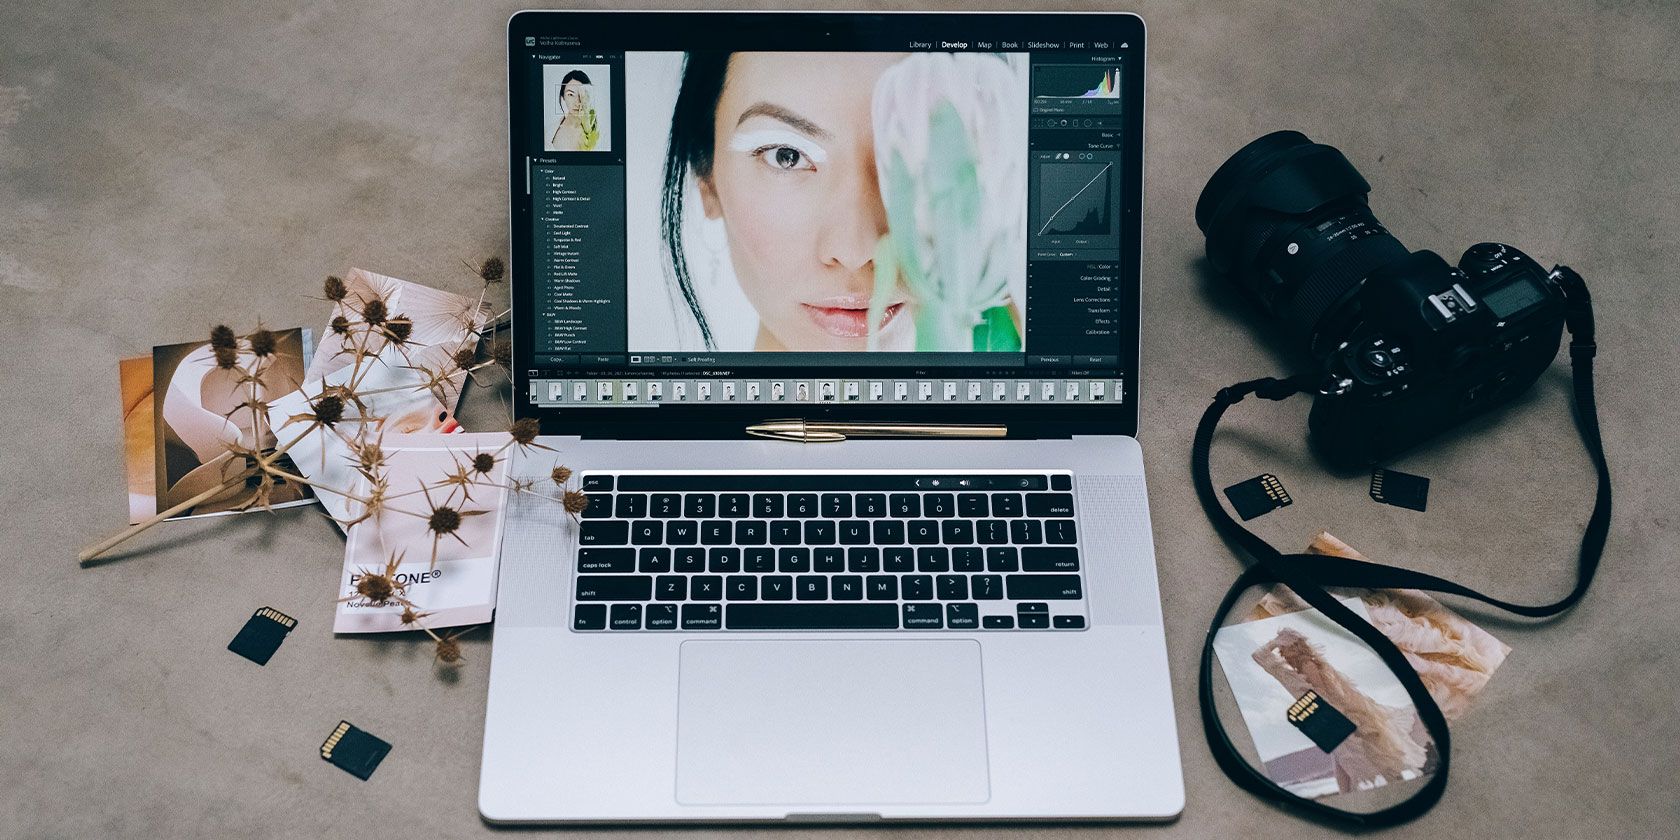 The 7 Best Photo Editing Tutorial Channels on YouTube